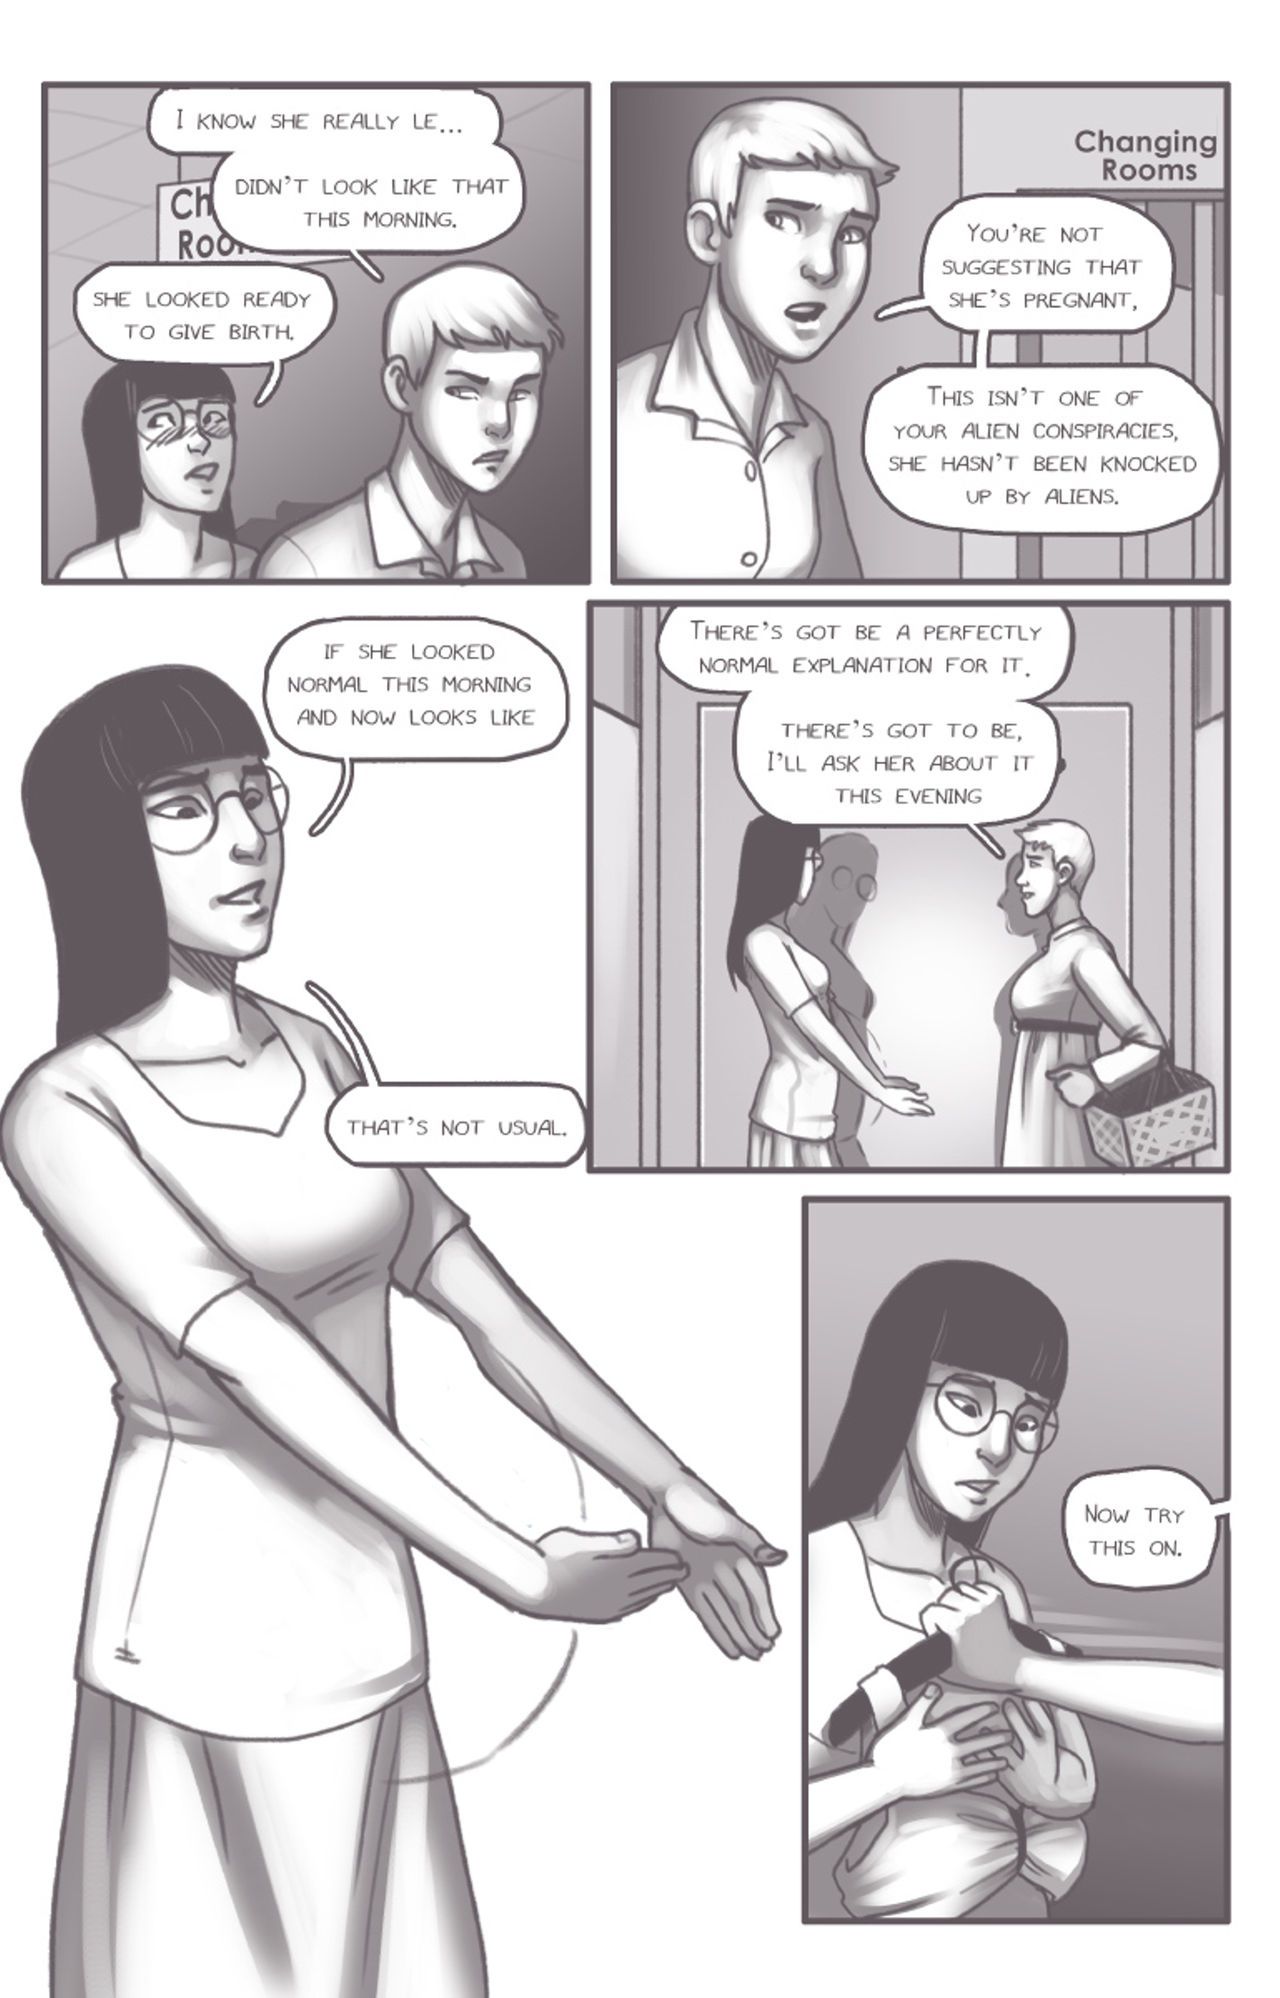 [Olympic-Dames] Alien Pregnancy Expansion Comic (Ongoing) 22